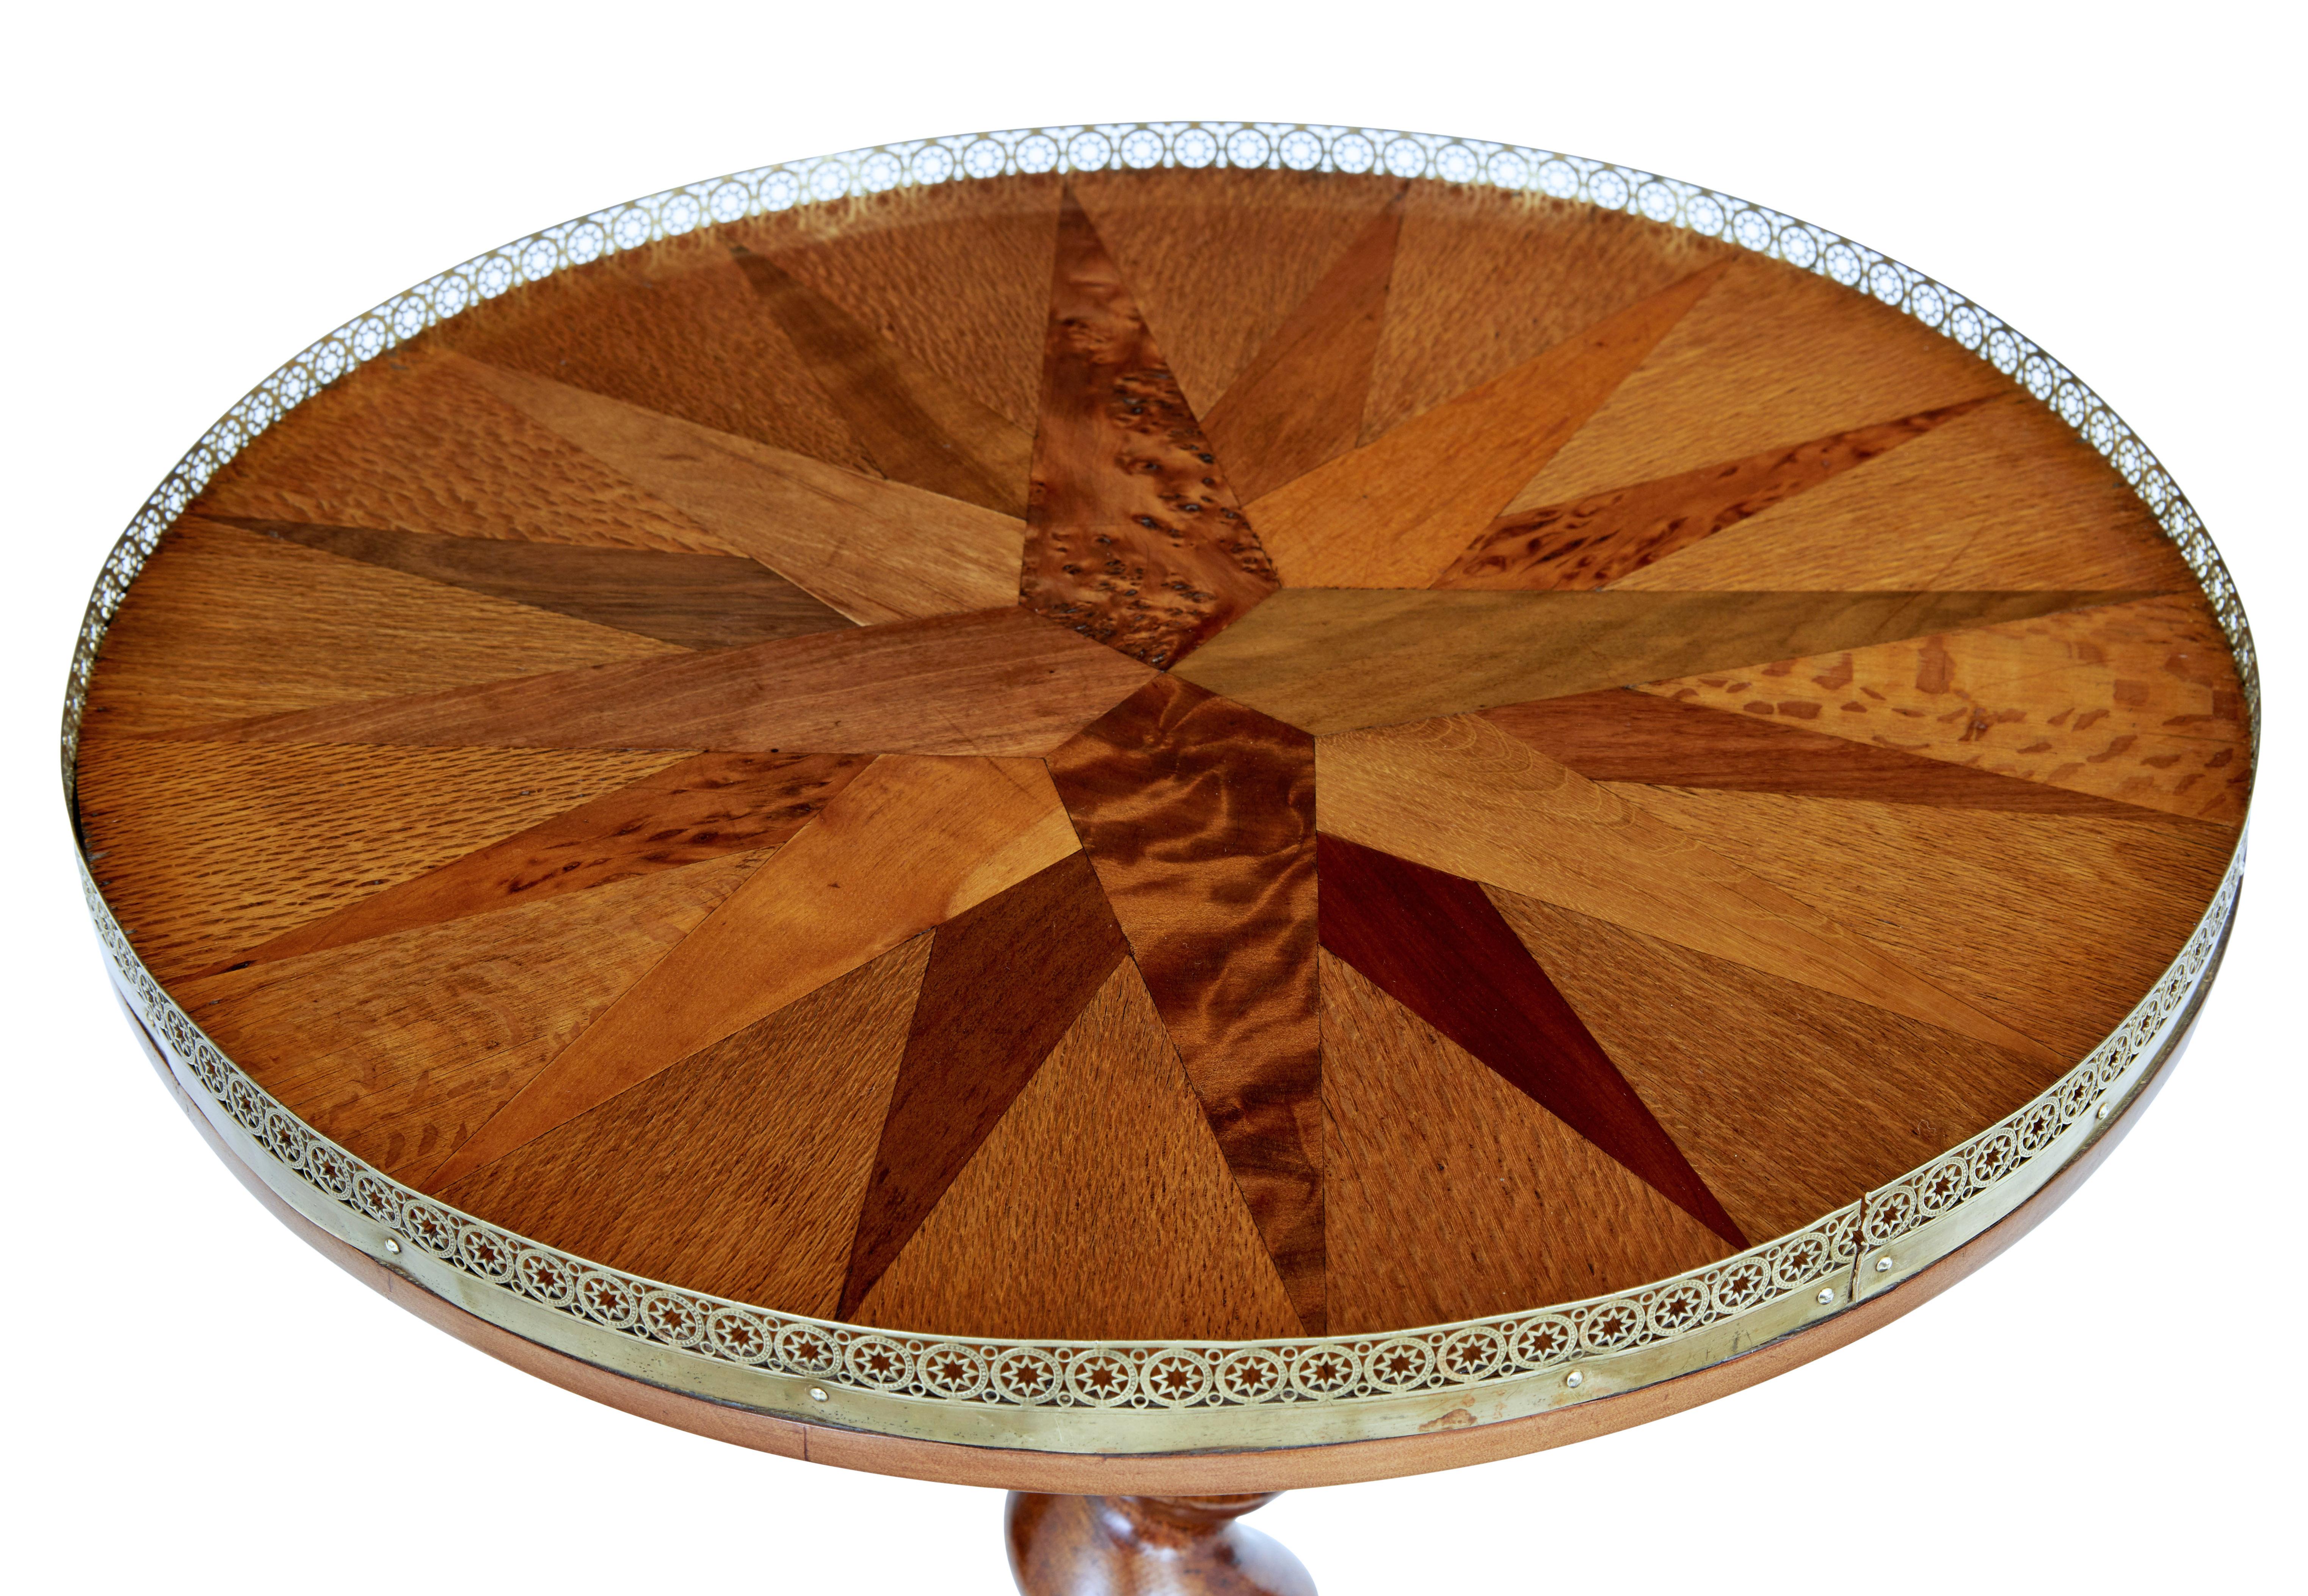 Rare 19th century occasional table, circa 1870.

Round top with has been beautifully arranged into segments showcasing various rare woods, which have been labelled underneath the top. Pierced brass gallery applied around the top edge.

Standing